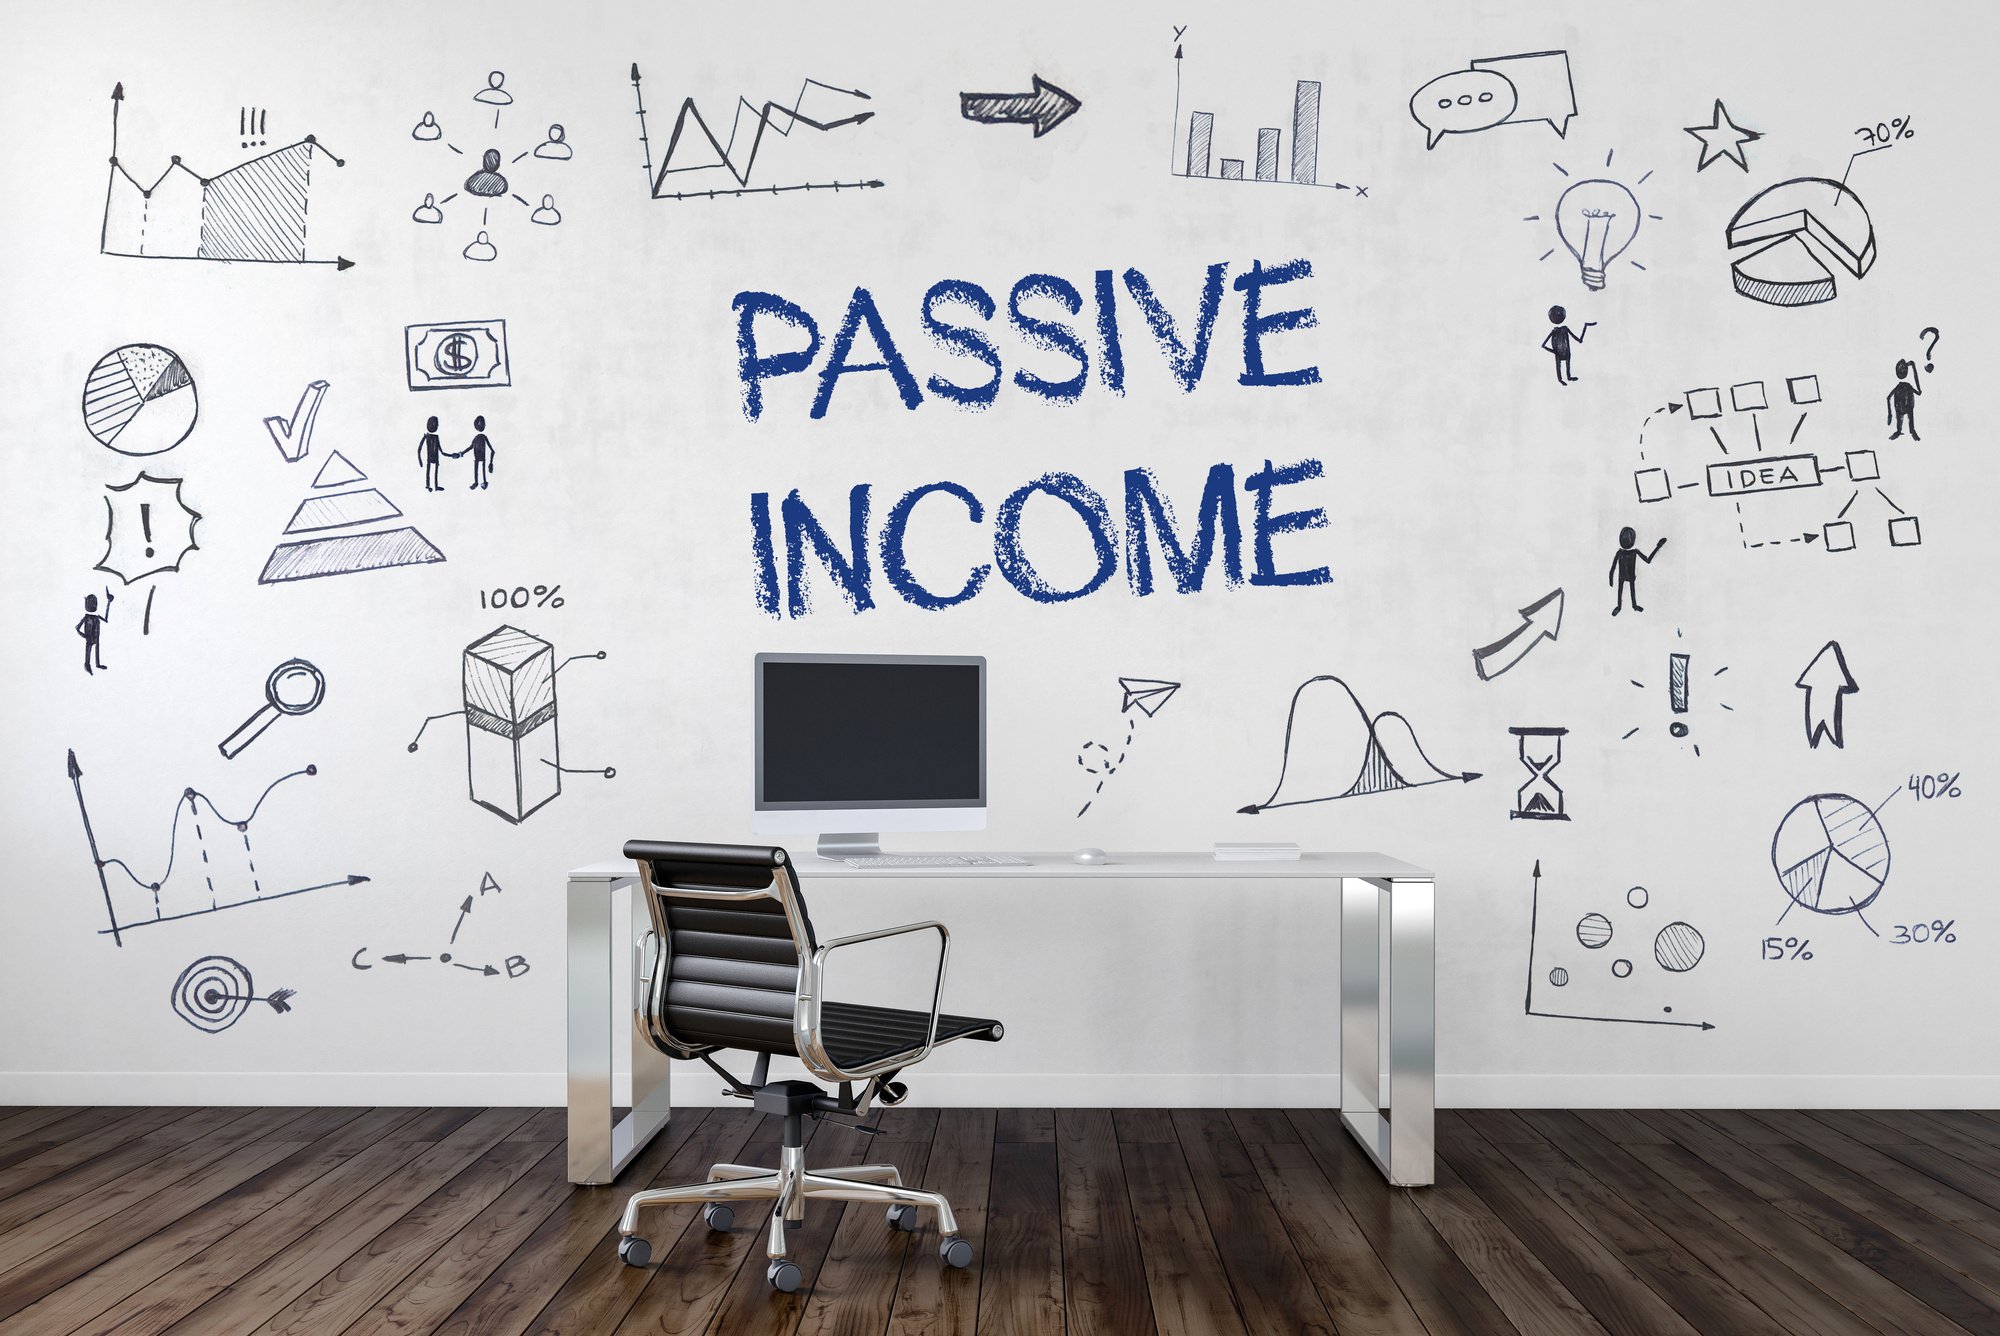 Are you looking for a smart, yet effective way to make a passive stream of income? Check out these passive income jobs from home...